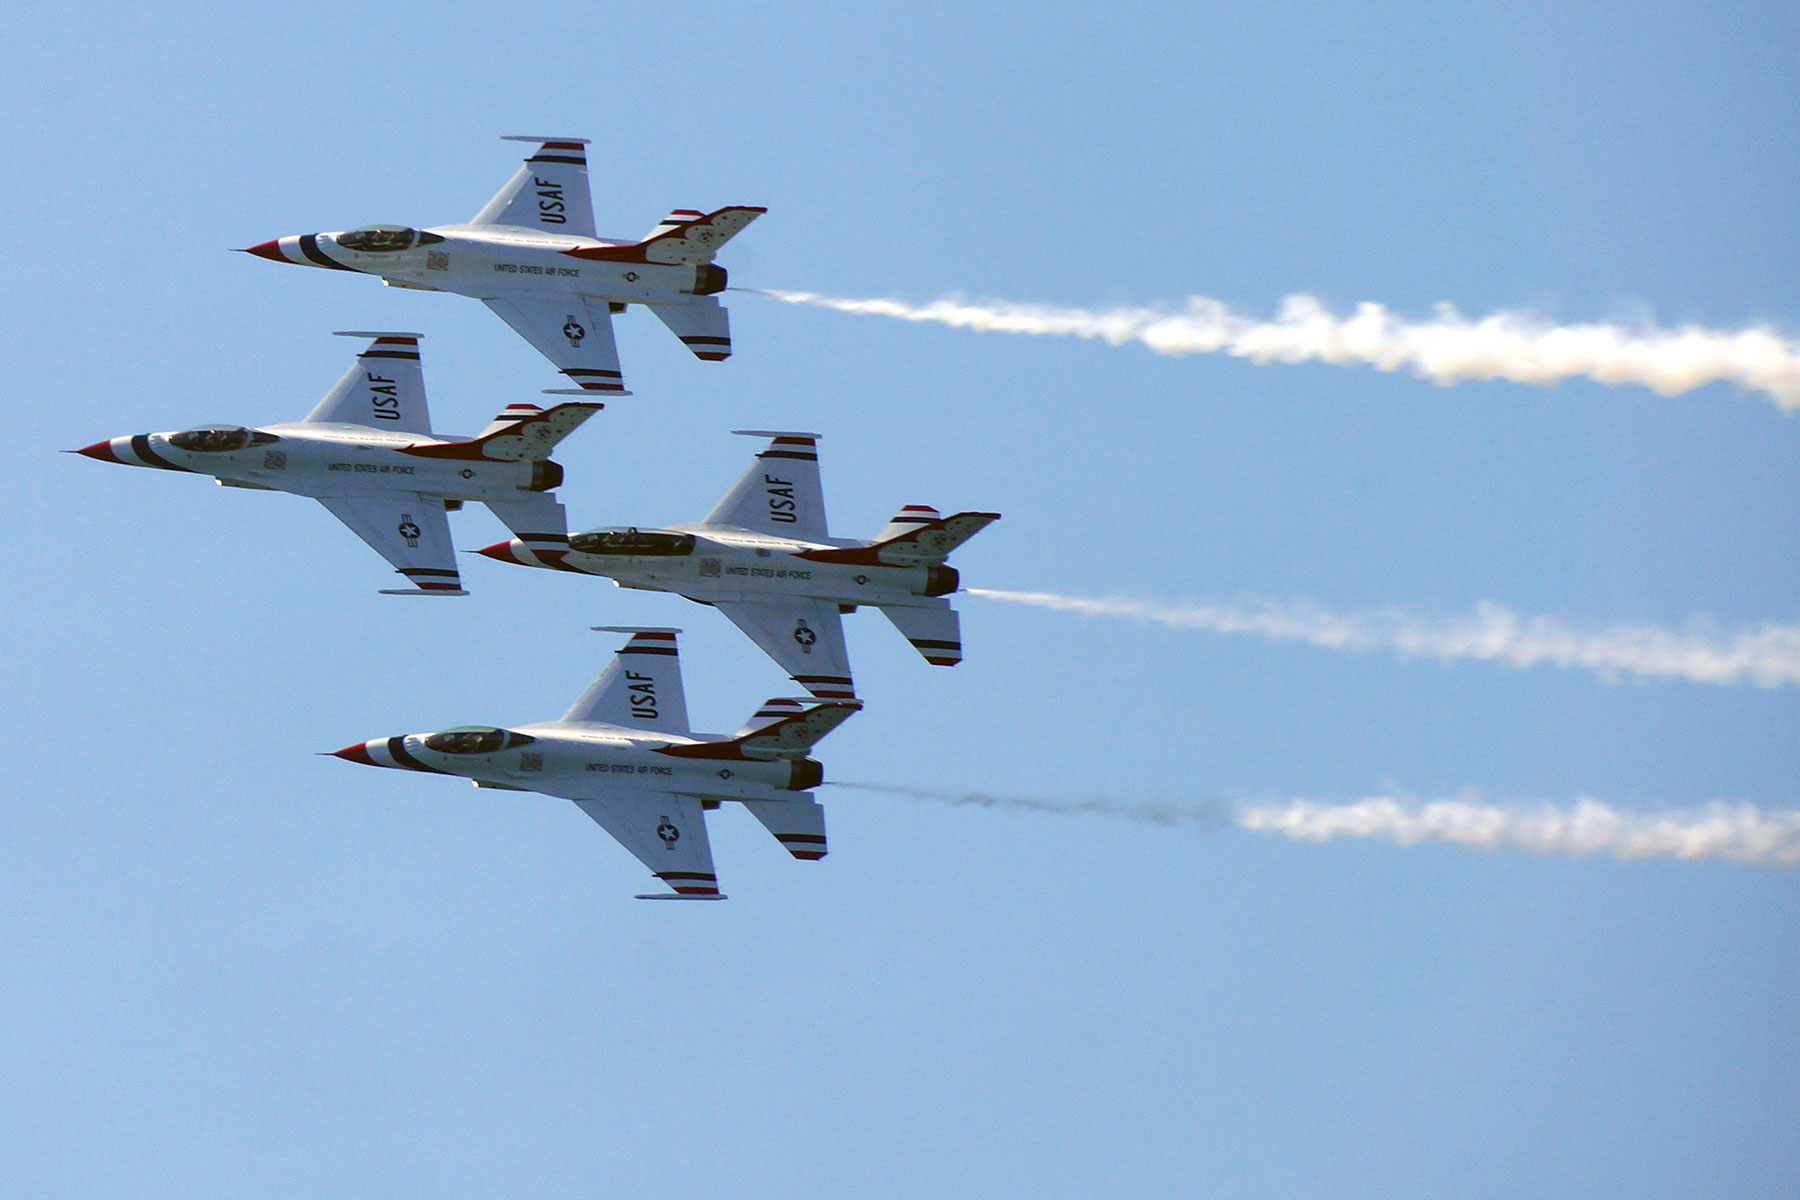 Milwaukee Air & Water Show returns for 2018 with worldclass performers